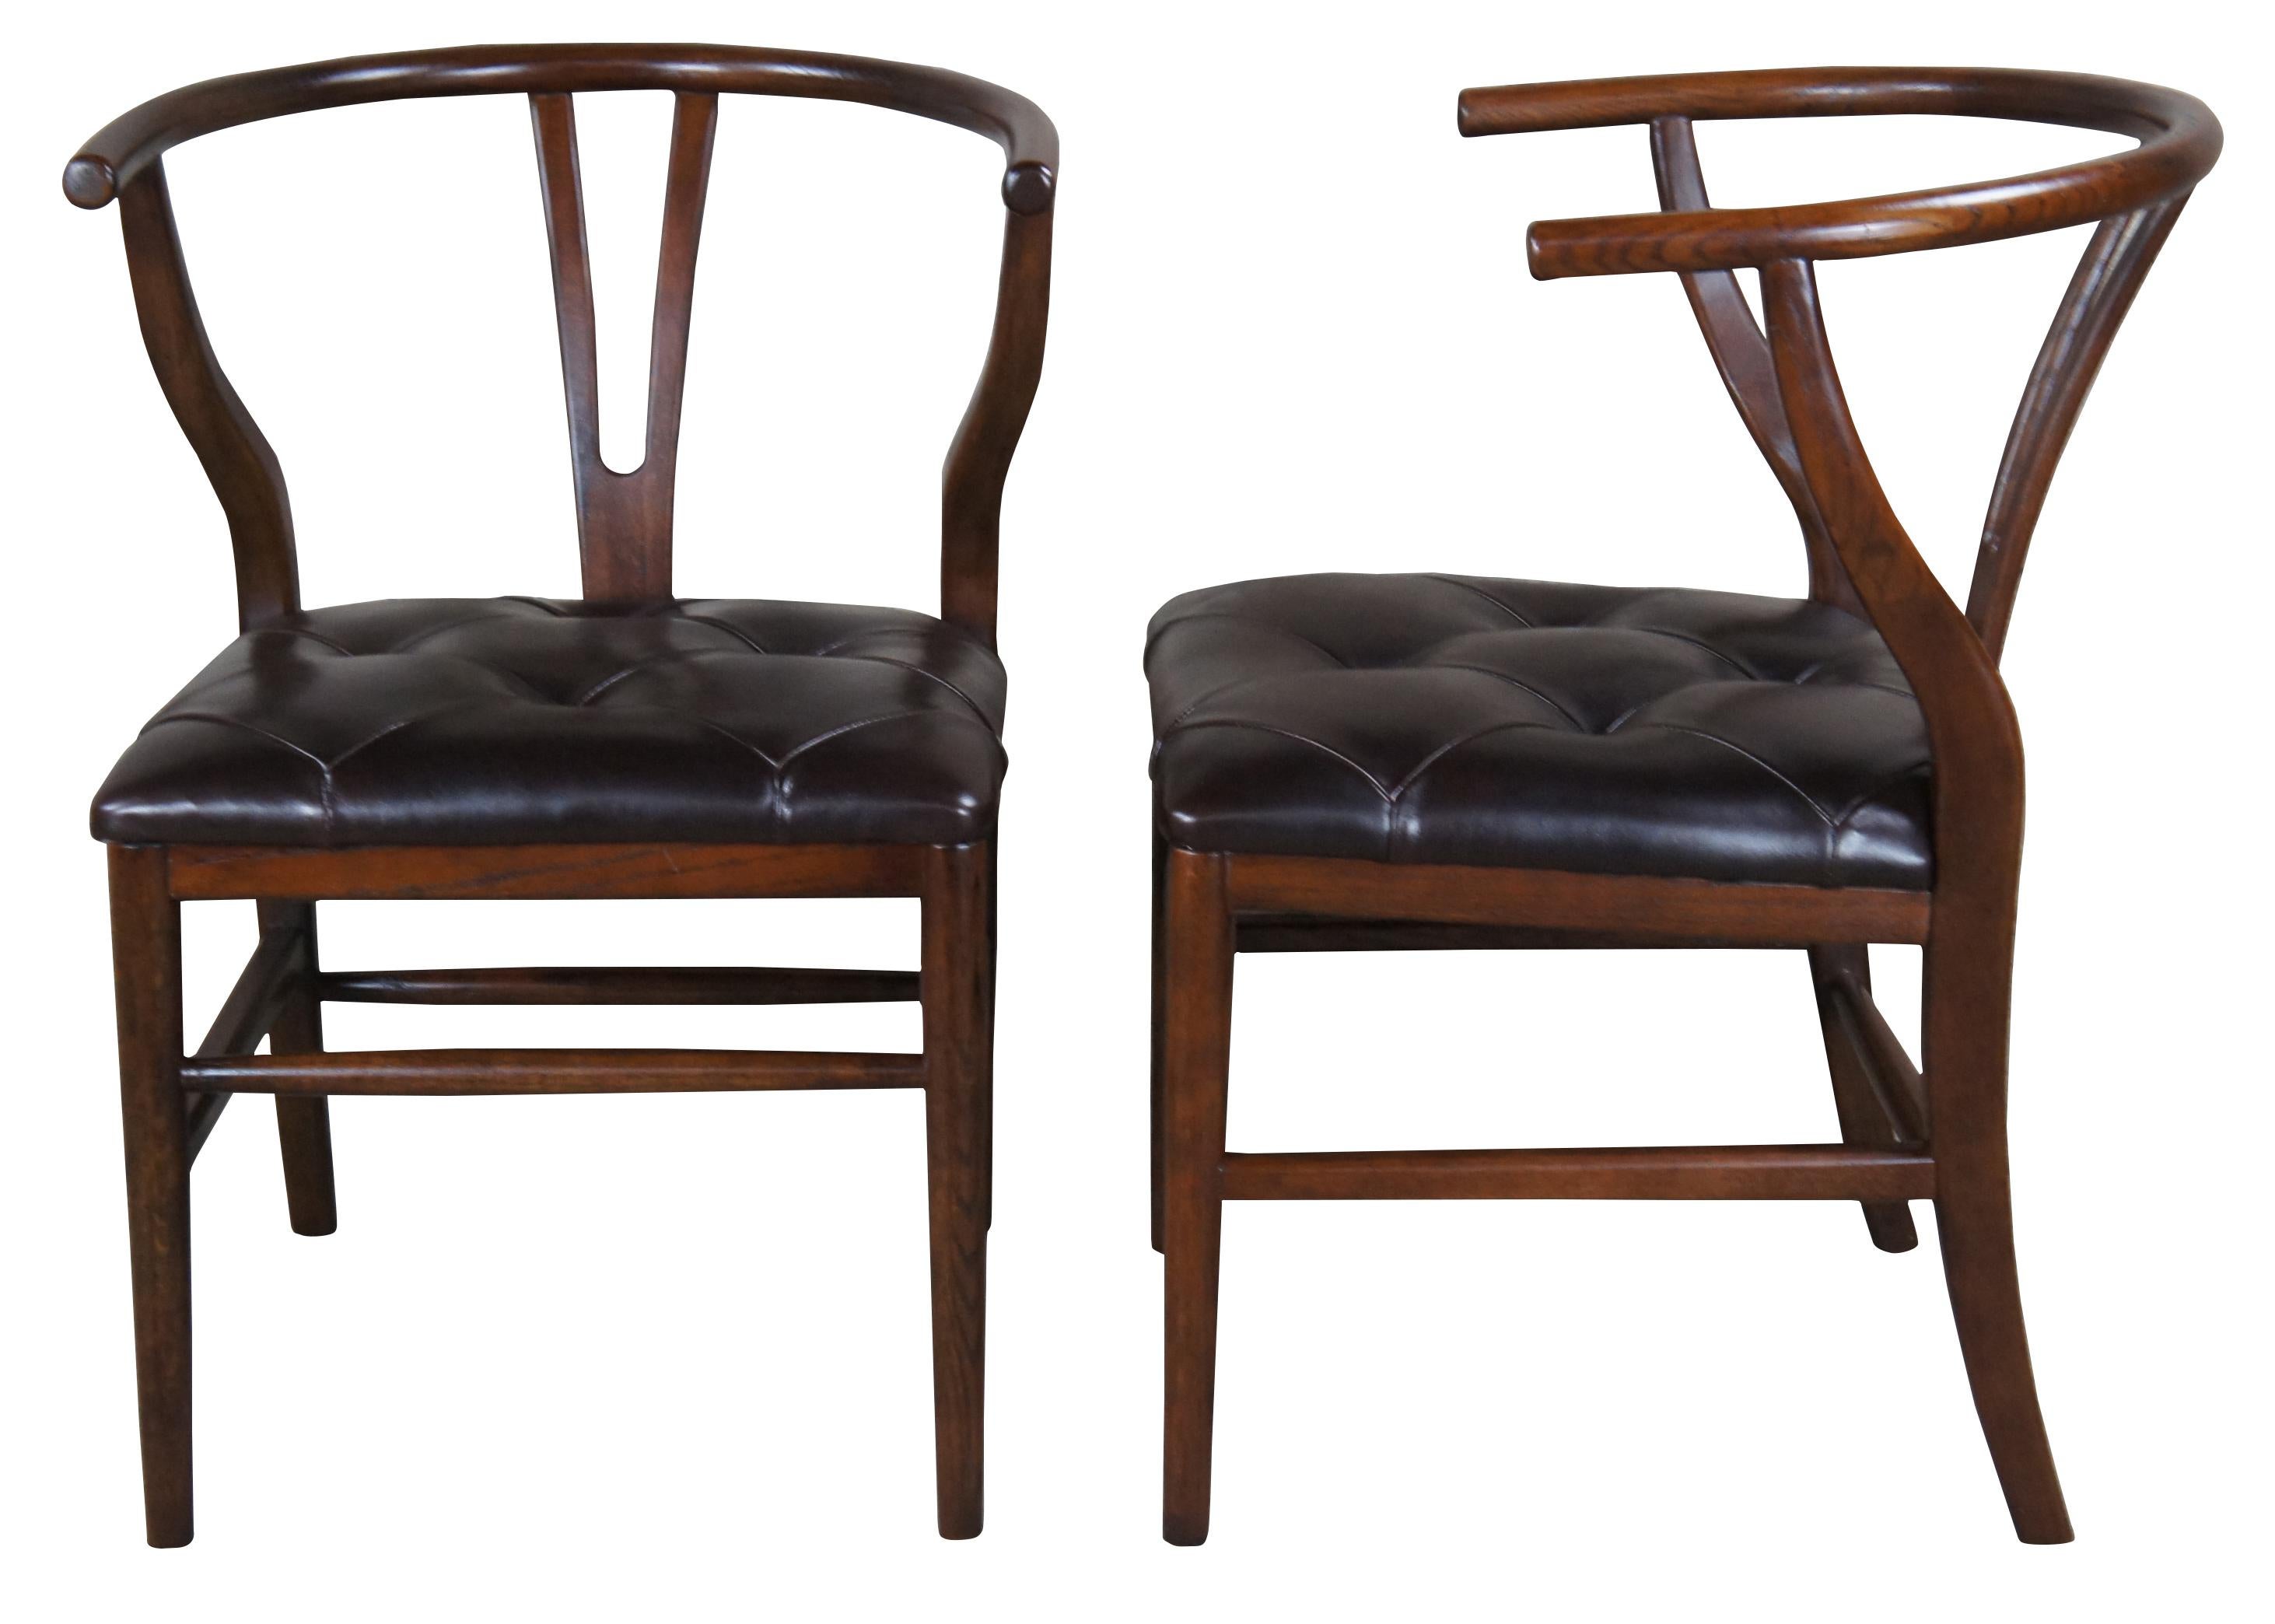 Two vintage walnut horseshoe armchairs featuring tufted leather seat and tapered legs. These chairs were made after the iconic mid century modern wishbone design of Hans Wegner.

Measures: 22